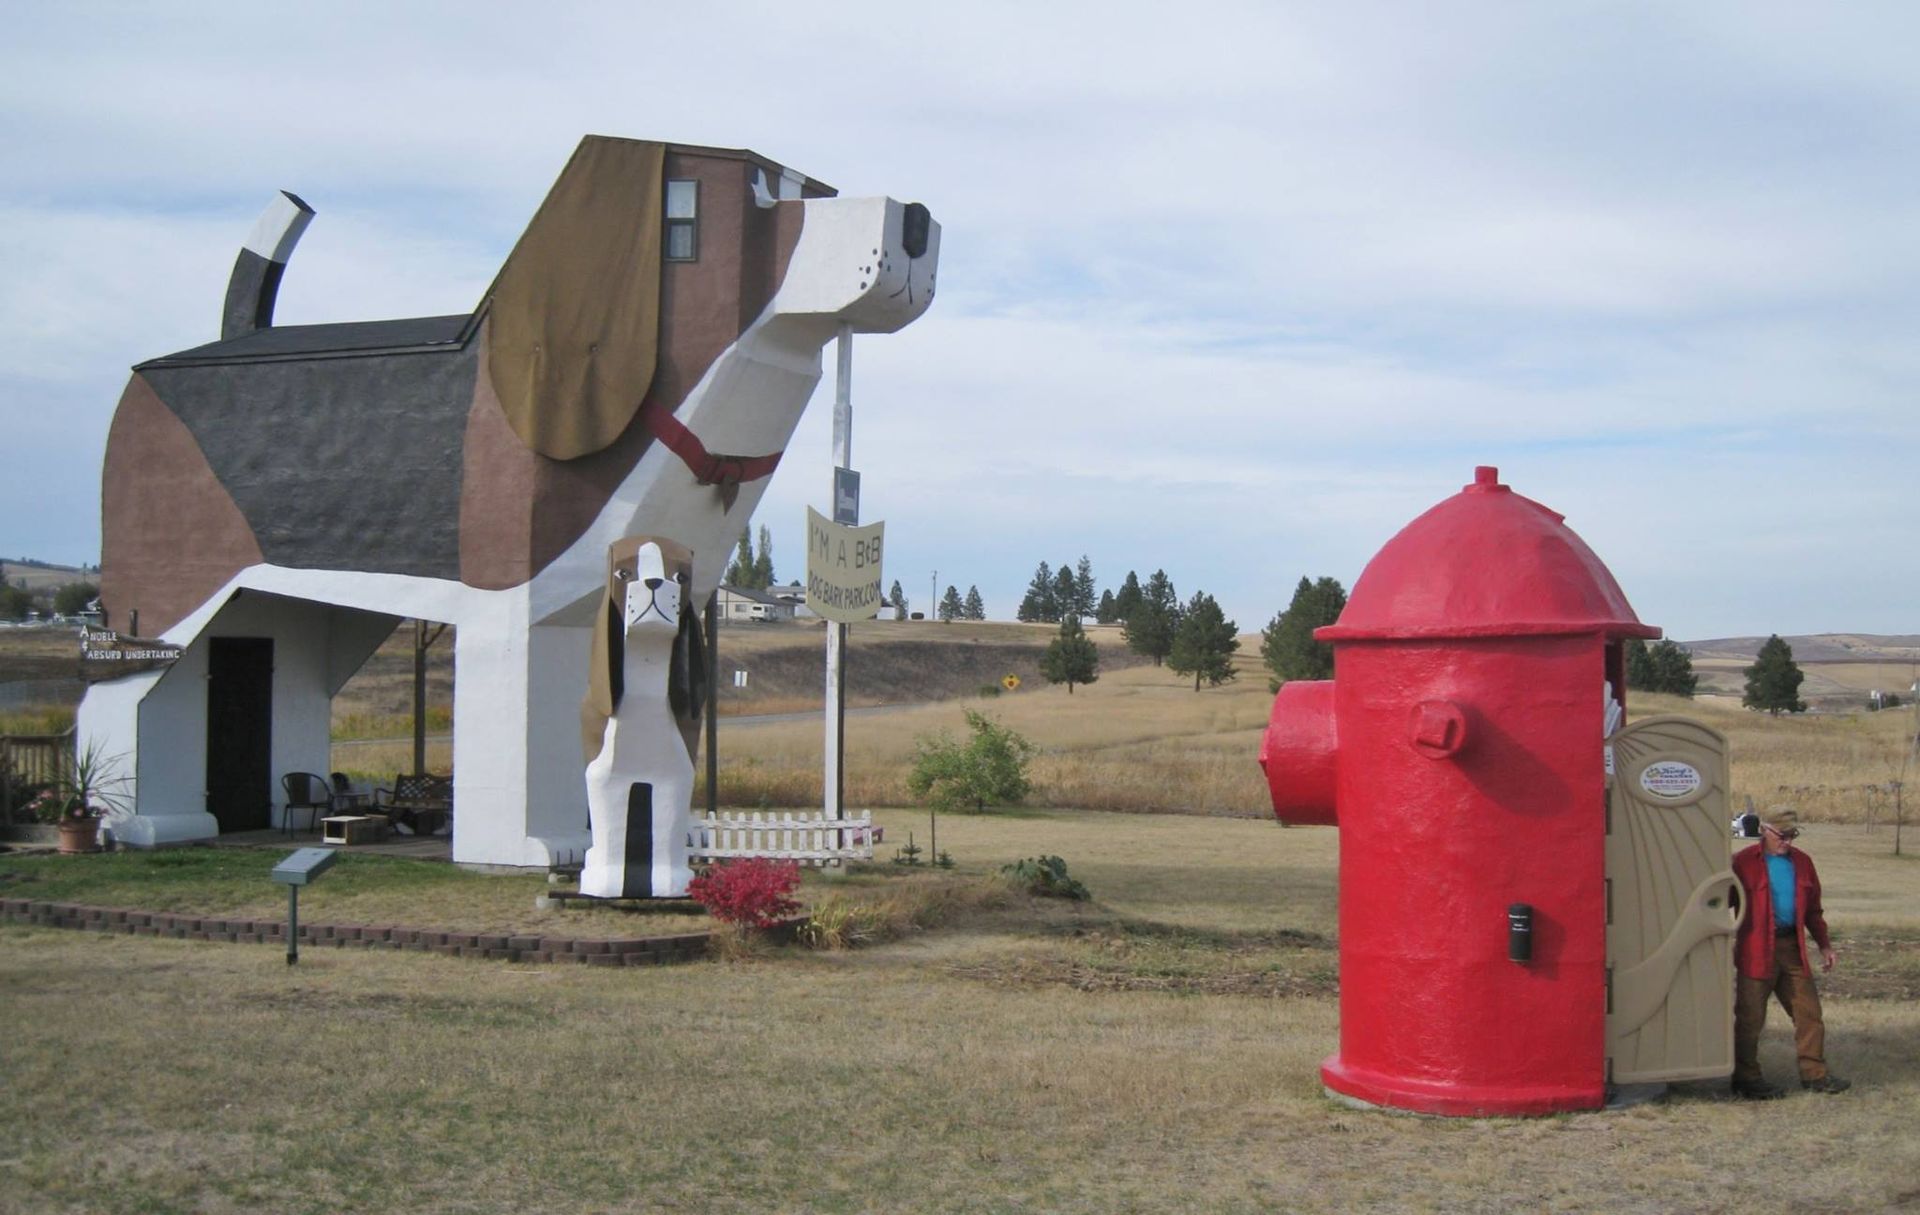 World's First Beagle-shaped Bed and breakfast, world record in Cottonwood, Idaho
